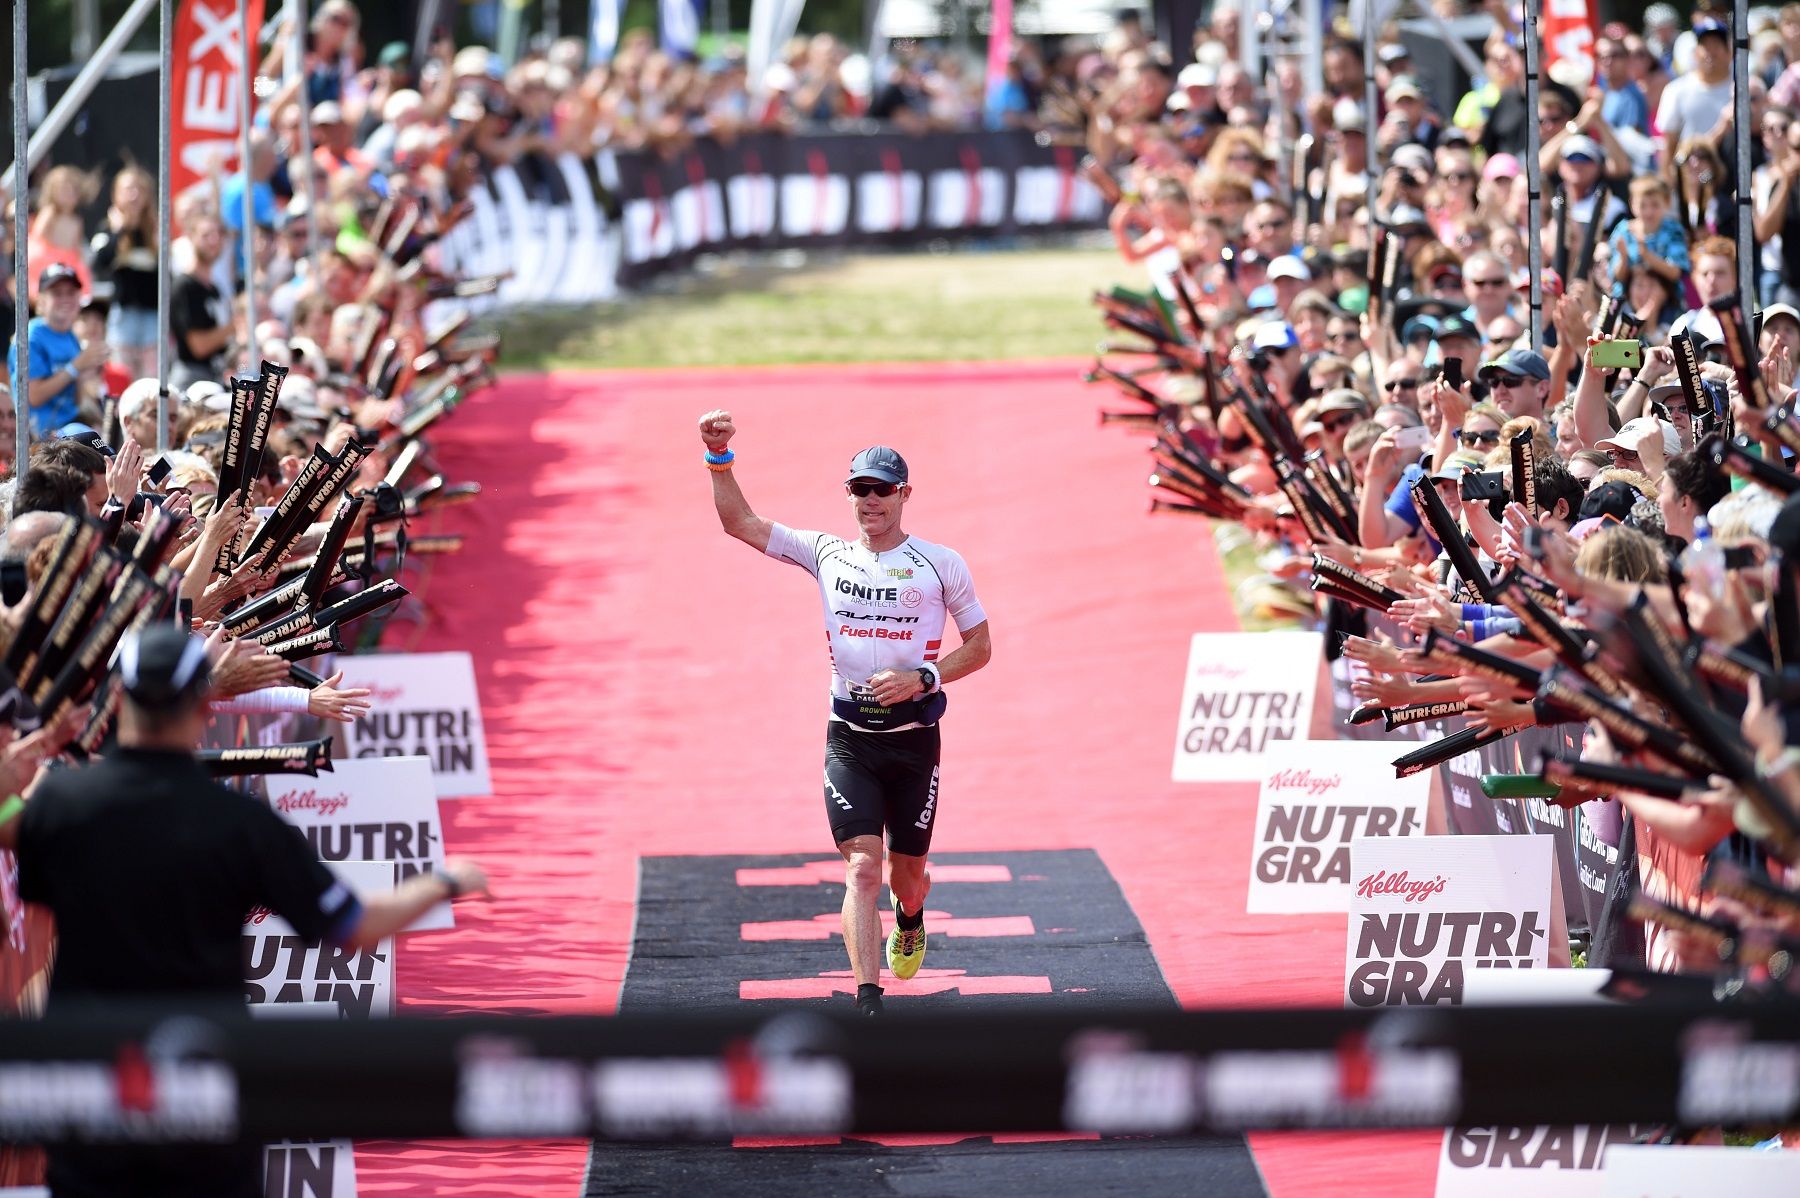 Ironman New Zealand 2023 Champions to Battle it Out for the Title